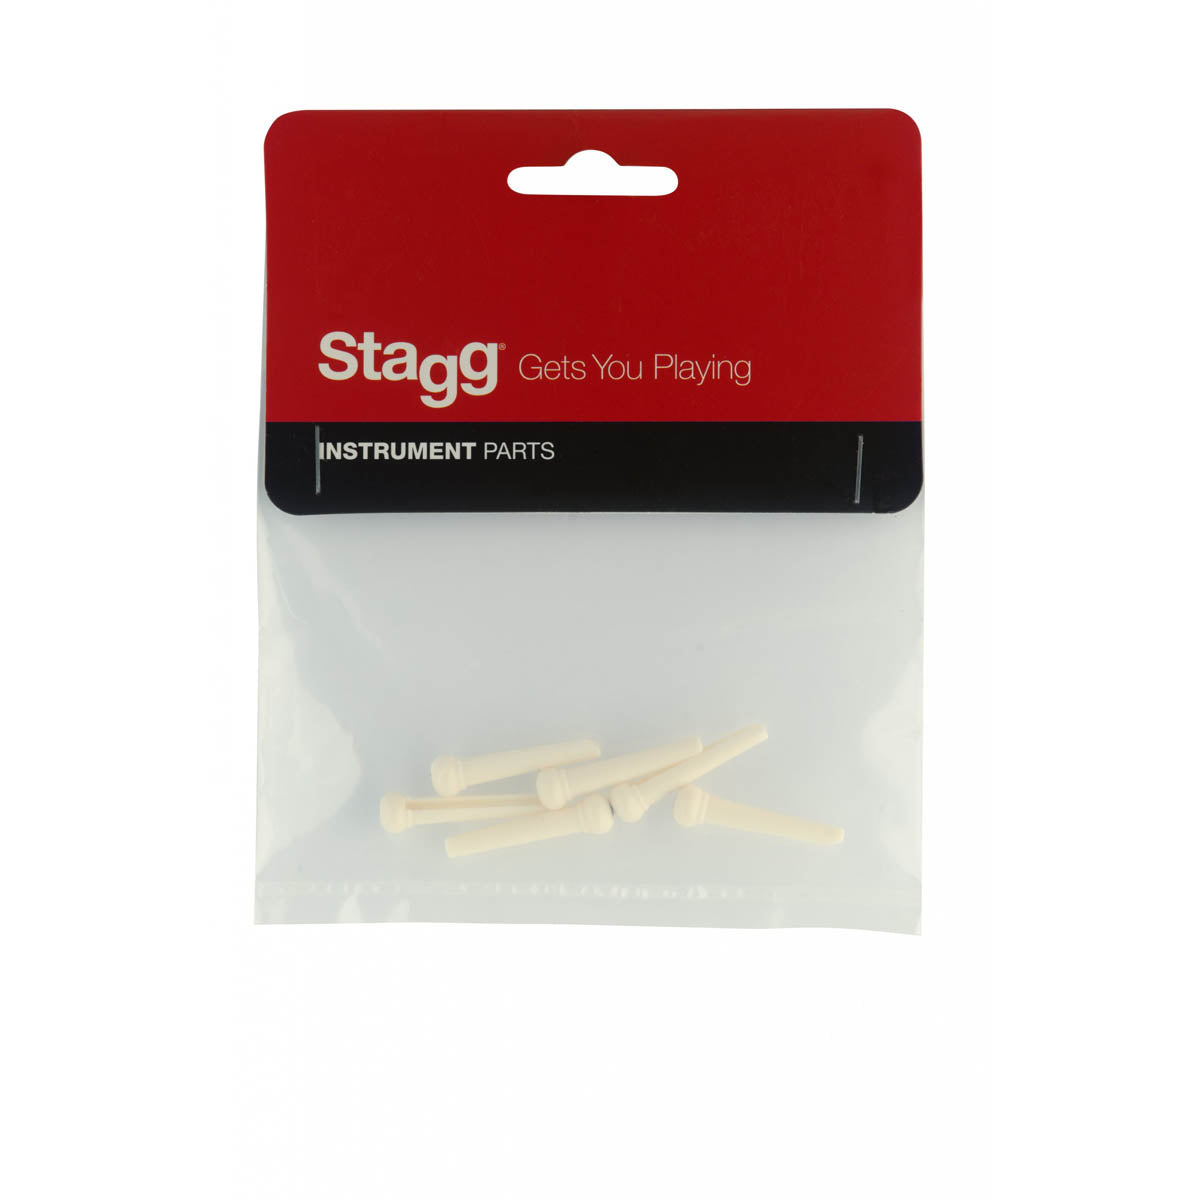 Stagg Acoustic Guitar Bridge Pins in White (Pack of 6)